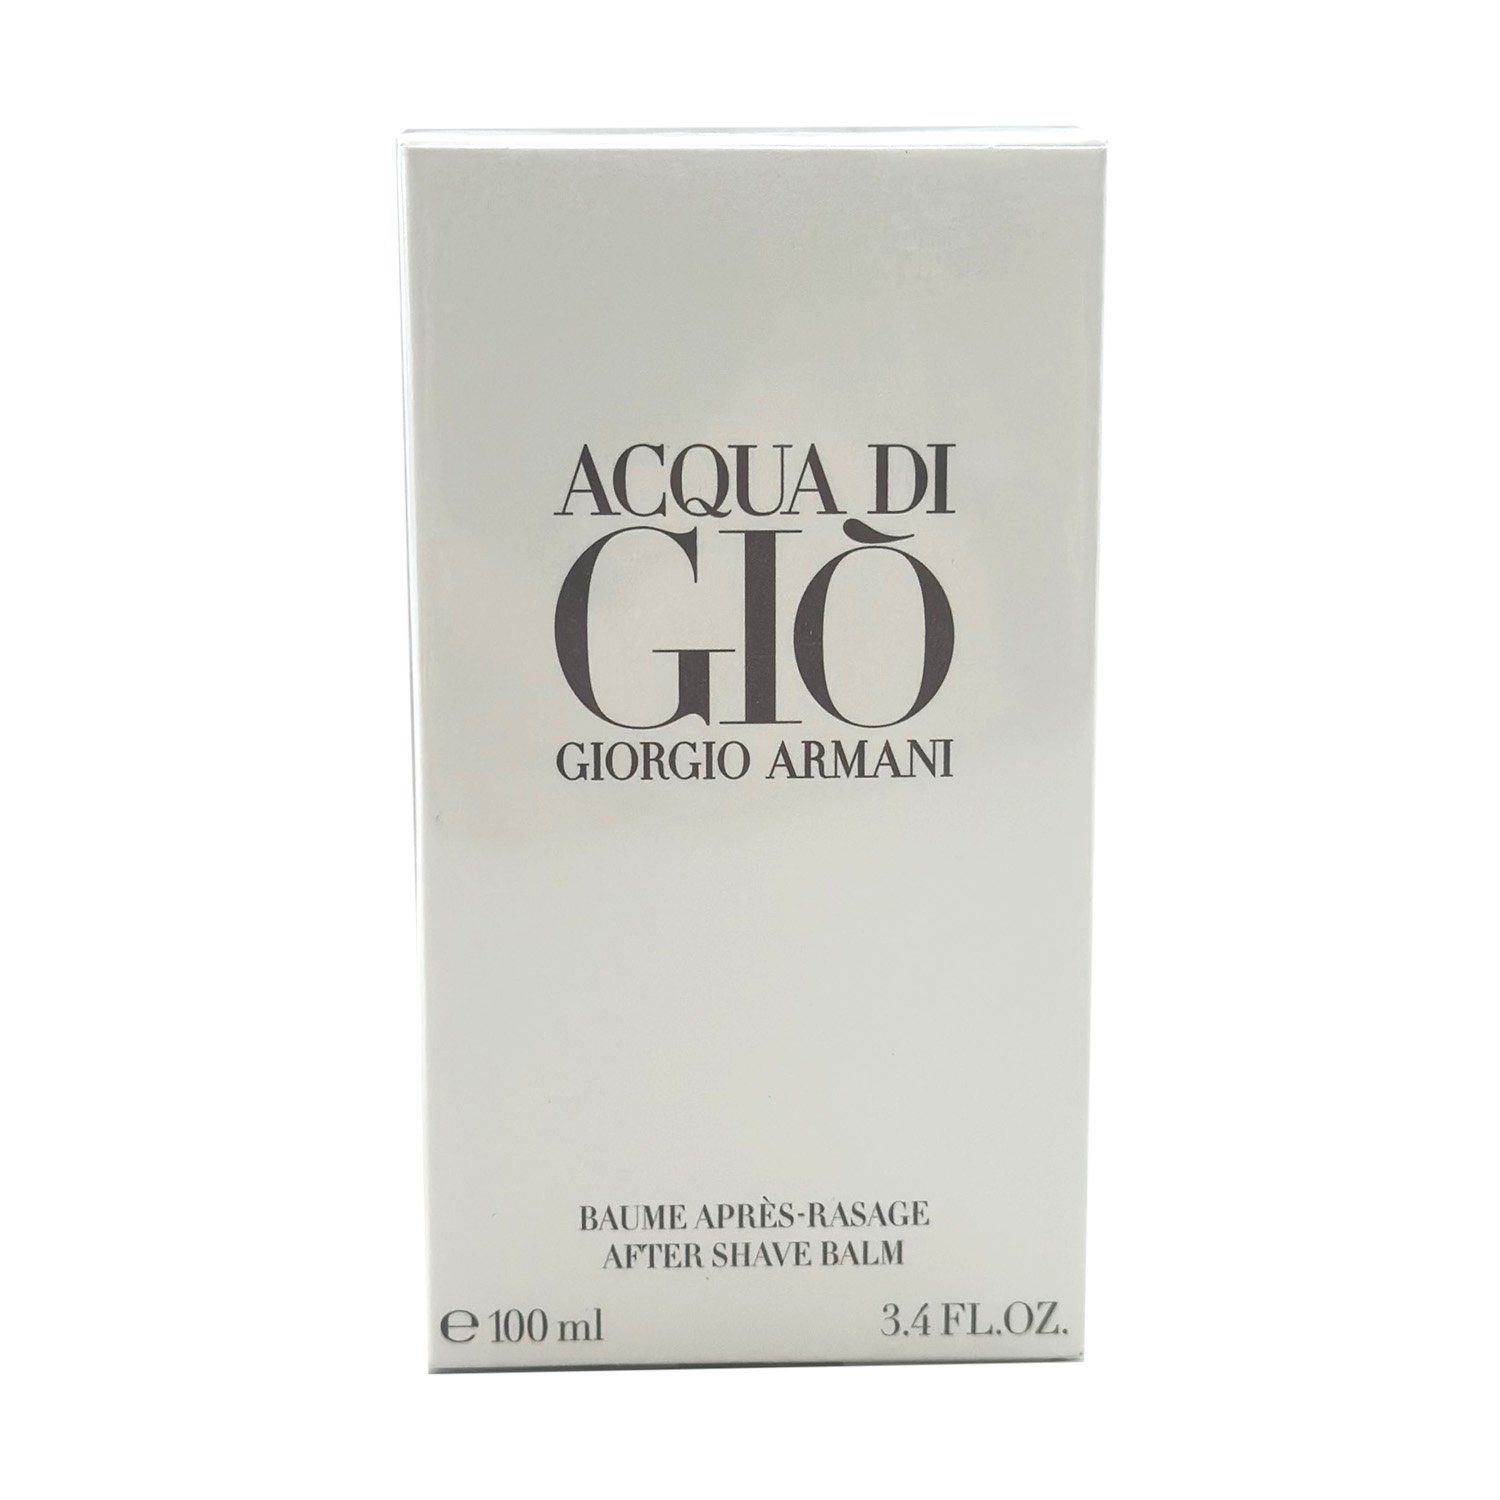 Armani Balm100 ml Acqua di geschmeidig Shave Lotion Shave Packung, After Homme Armani After Giorgio Gio